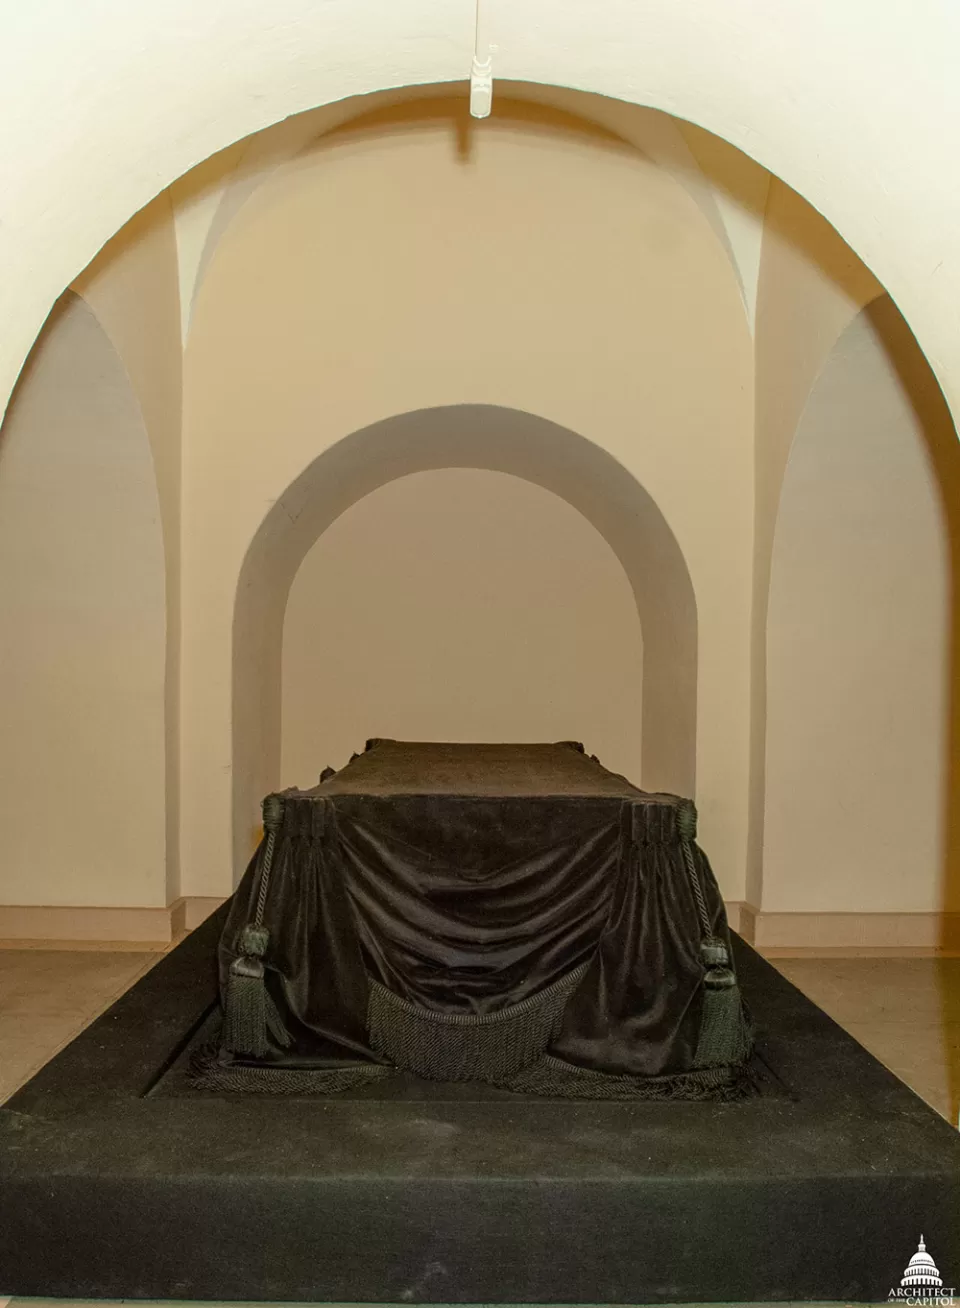 The Lincoln catafalque, constructed by Job W. Angus and others to support the casket of Abraham Lincoln while the president's body lay in state in the U.S. Capitol Rotunda.